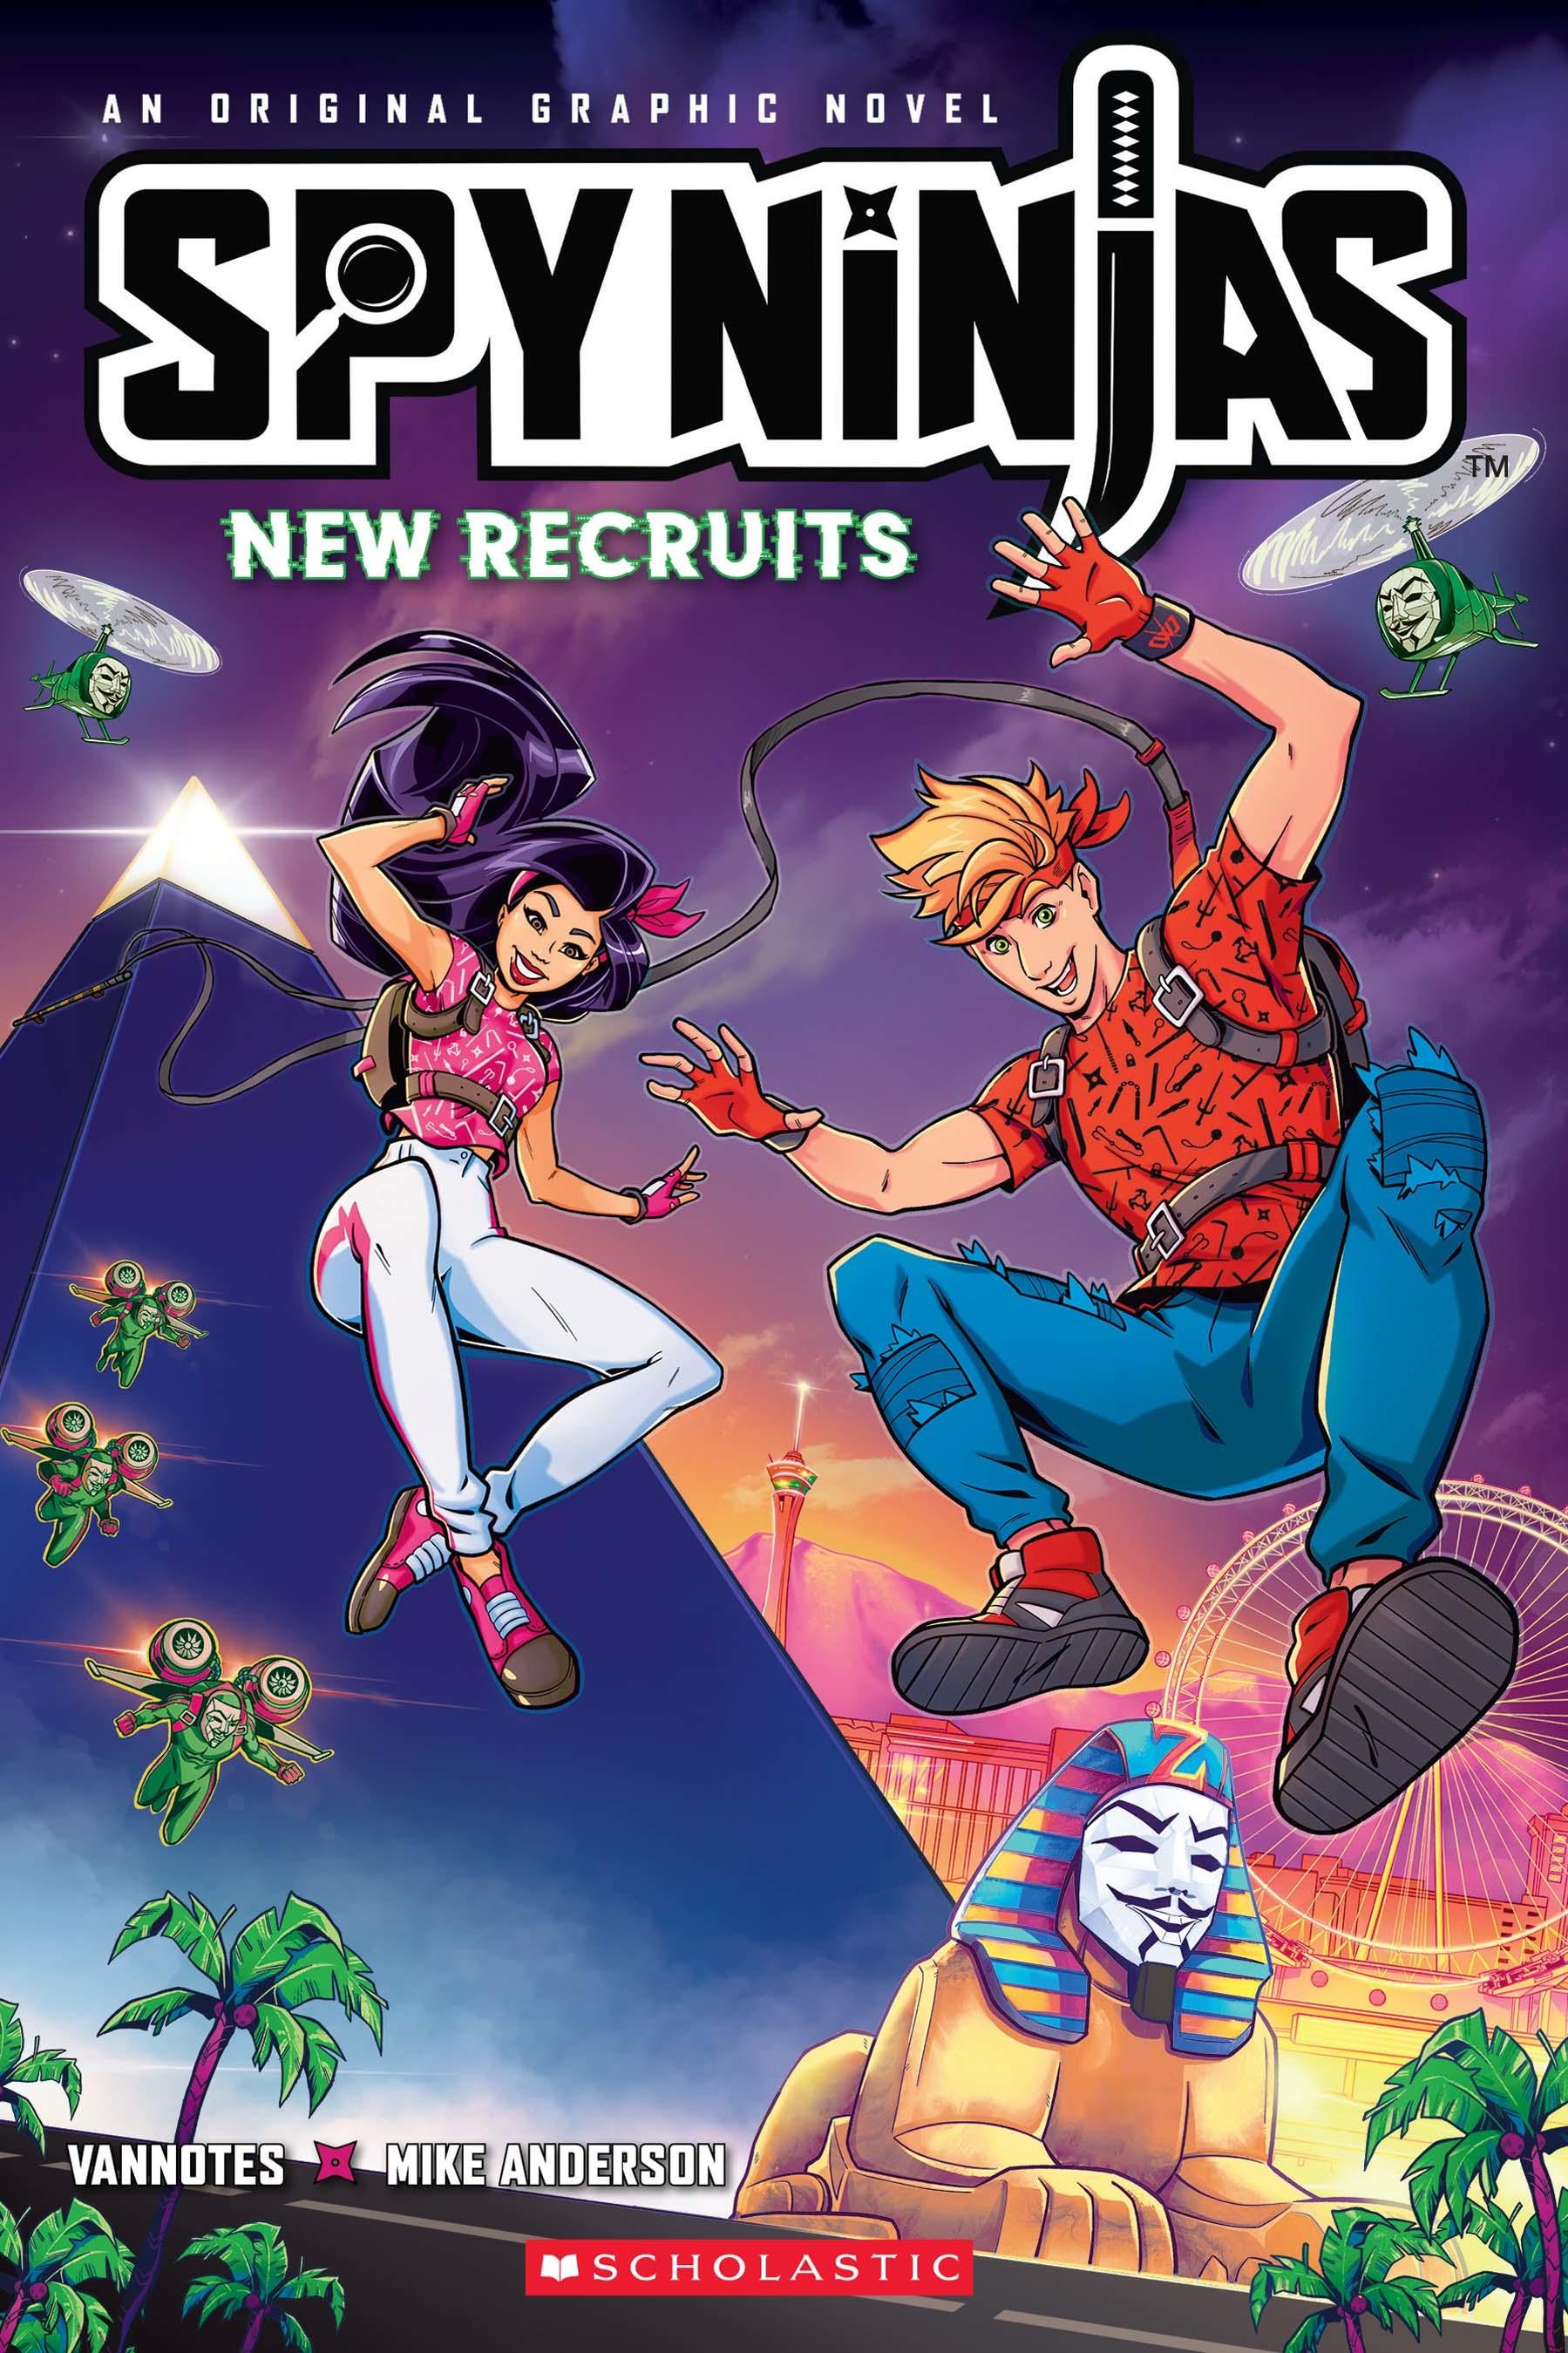 spy-ninjas-new-recruits-preview-cover.jpg